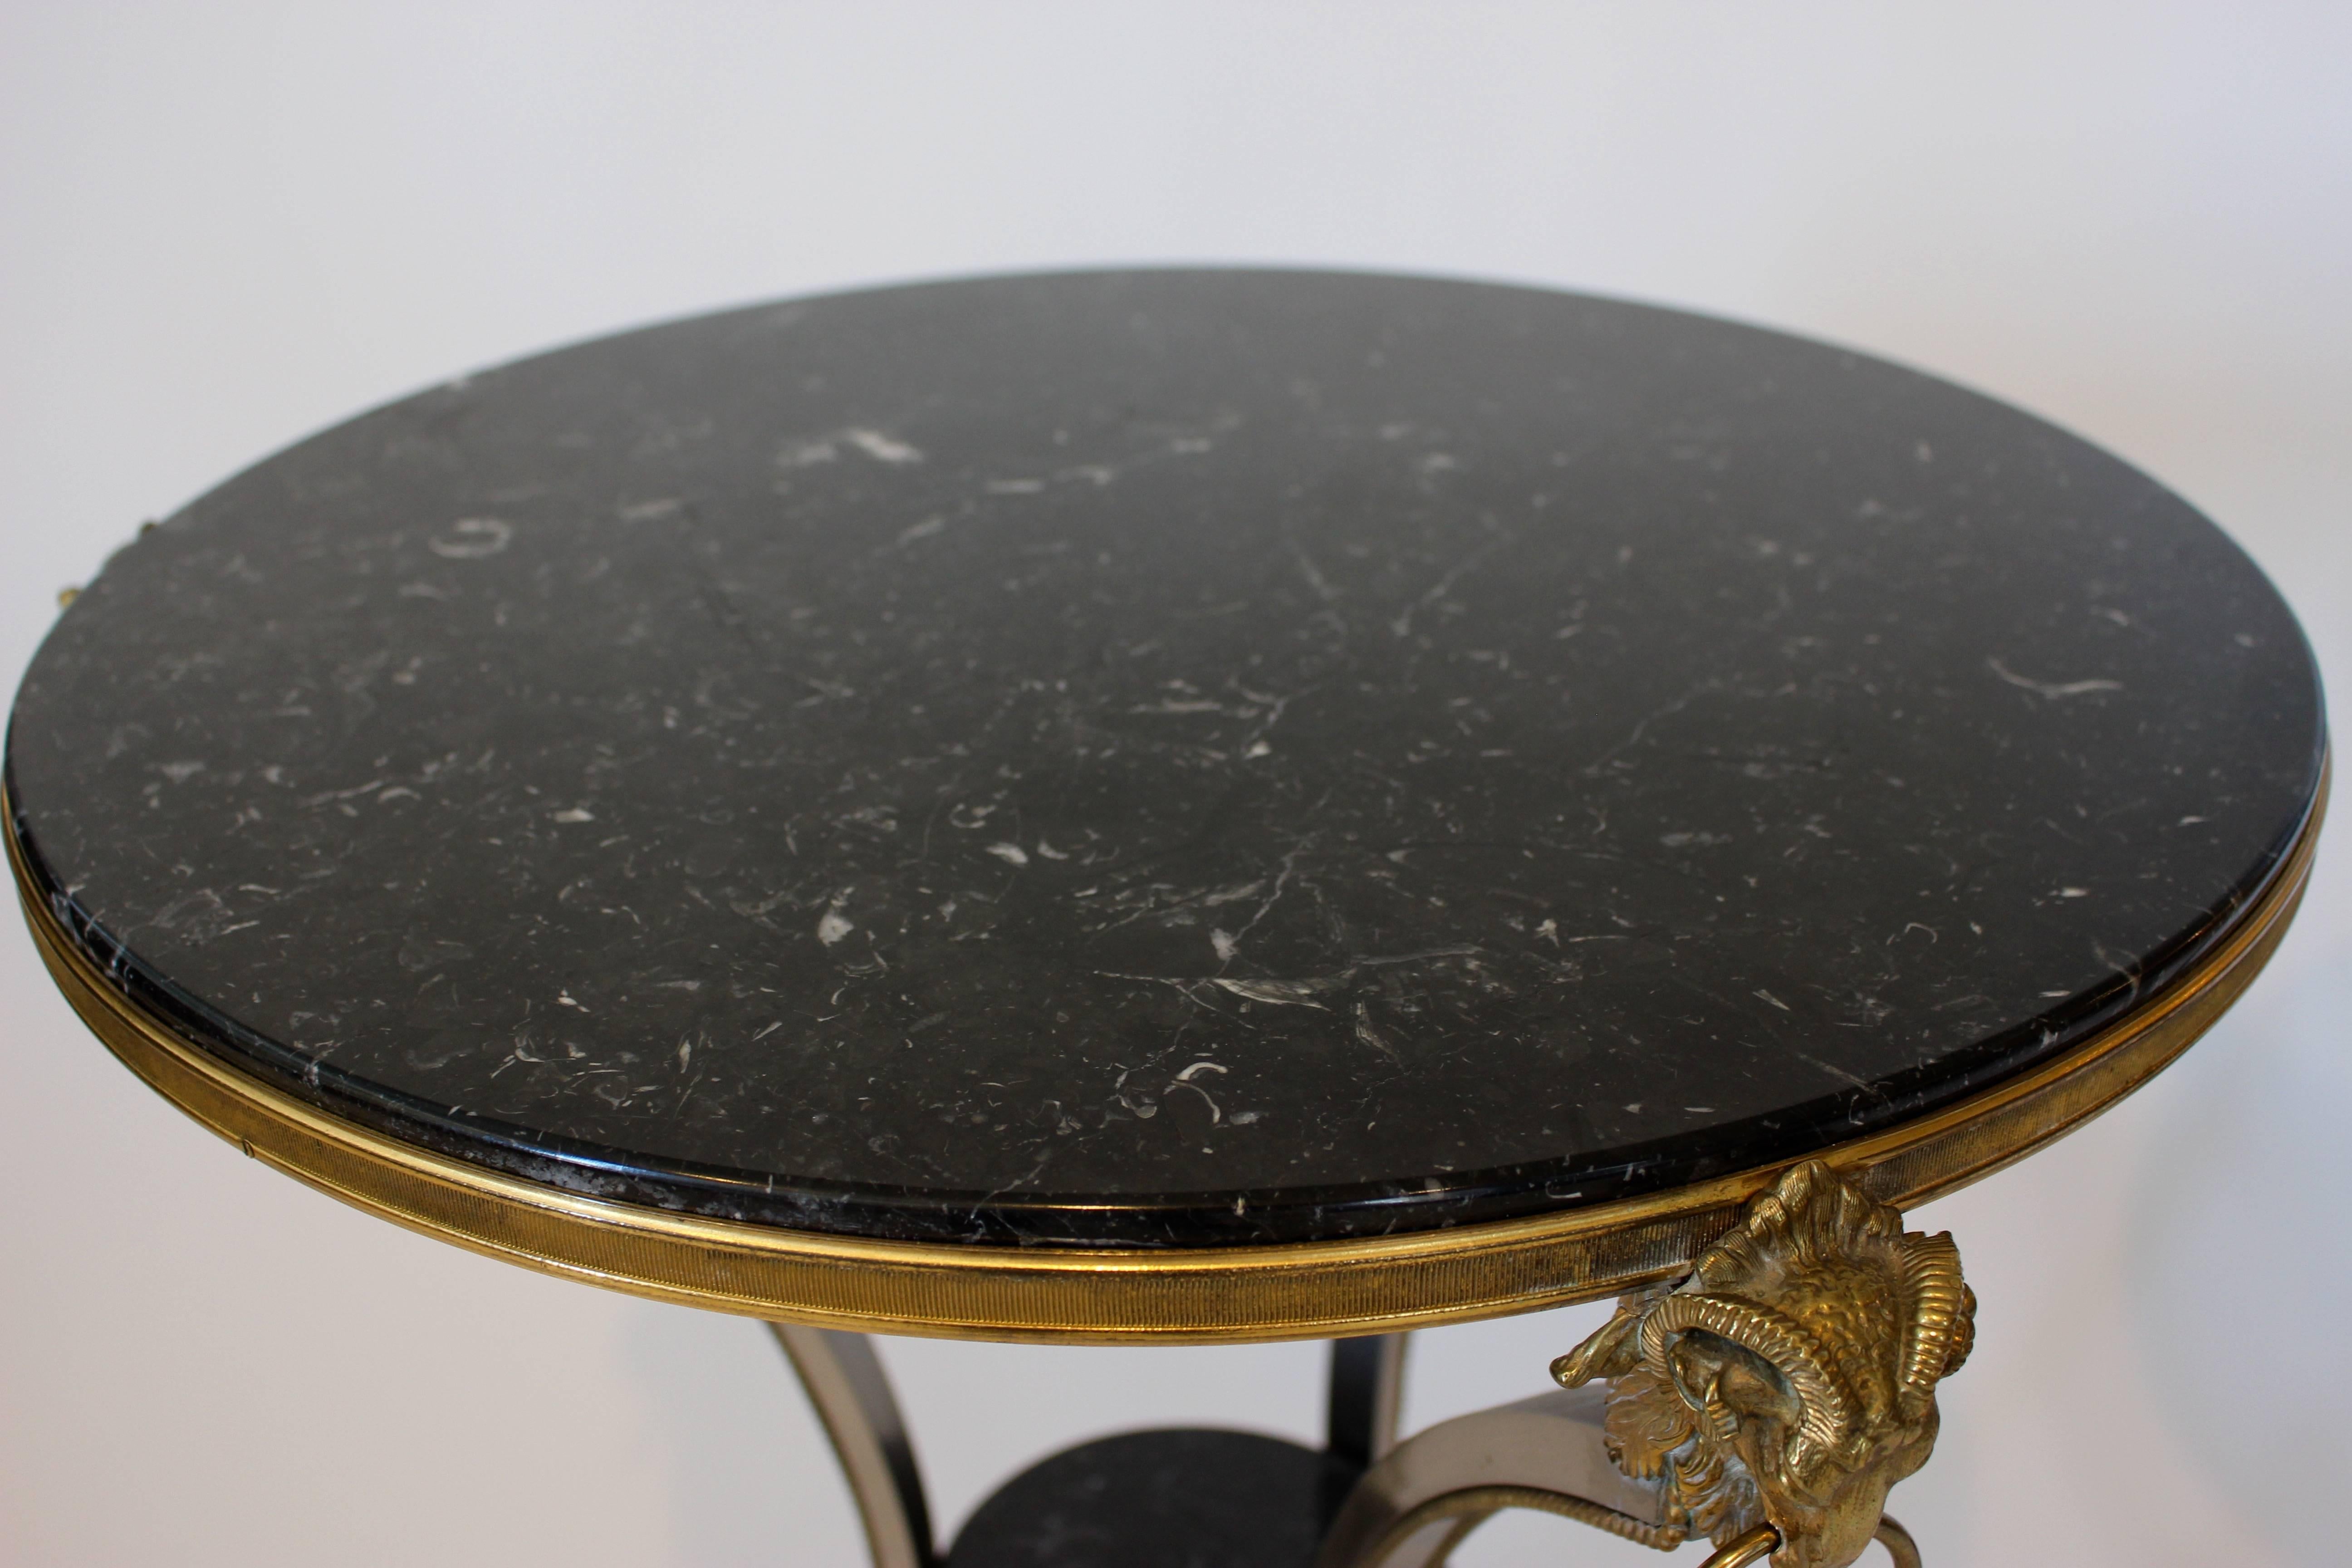 A most elegant associated pair of US ormolu, metal and marble guéridon tables from the 21st century. The tables present a French circular variegated black marble top within a reeded ormolu border. Each piece rests on three inward curved metal legs